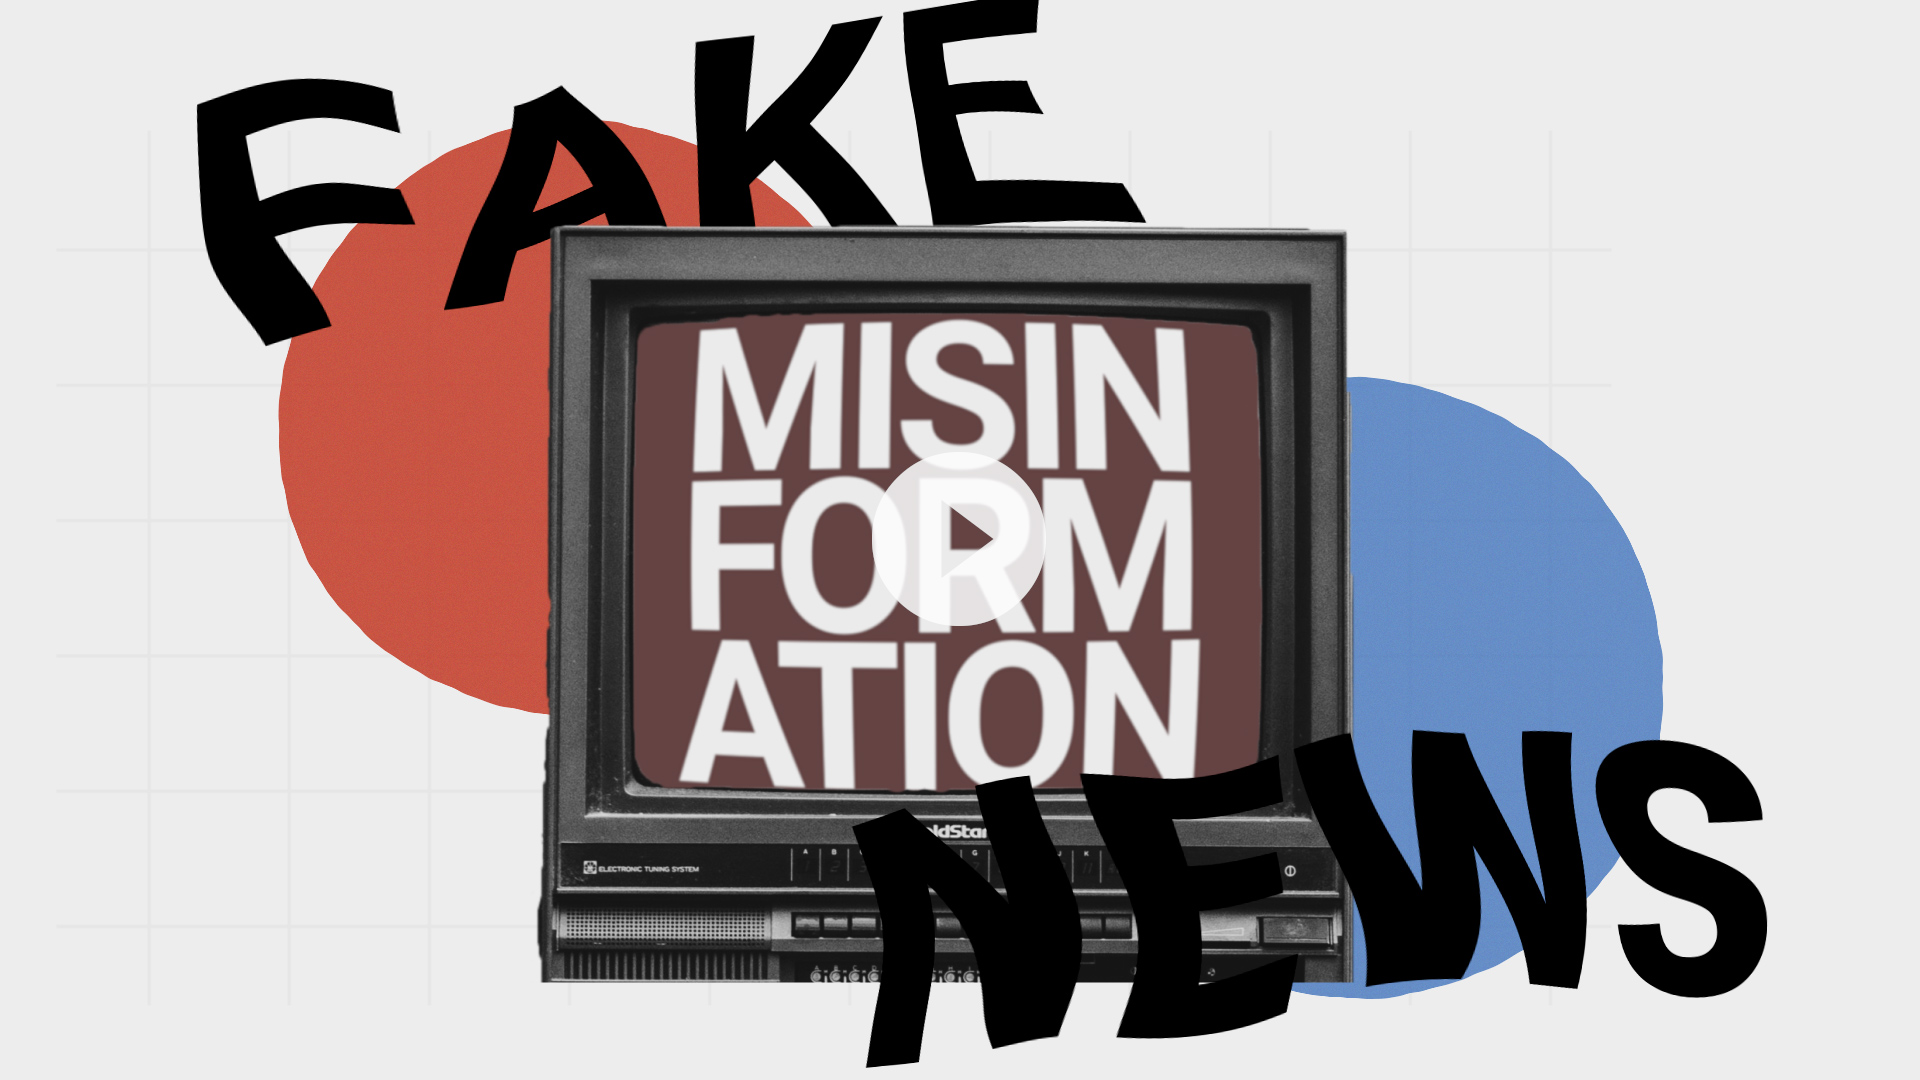 Fake news and misinformation